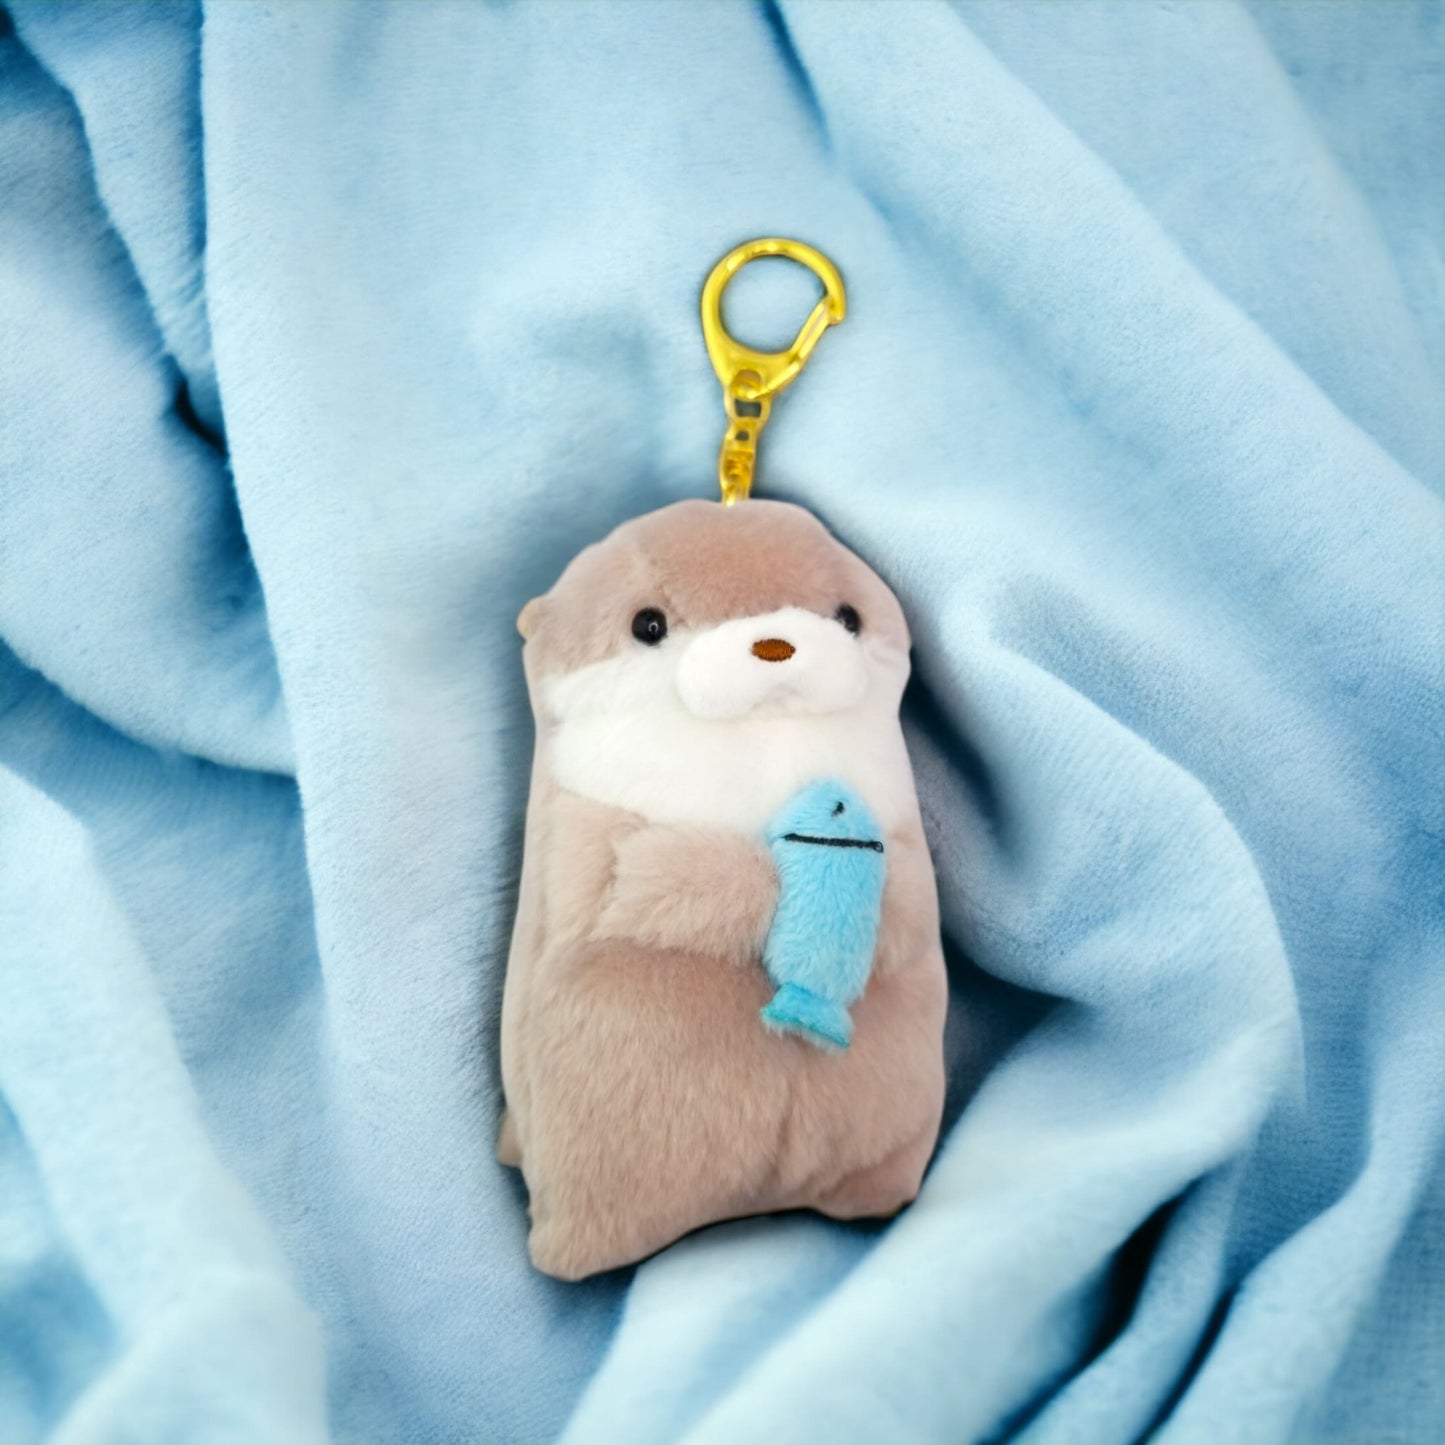 Otter and Fish Plush Keychain from Confetti Kitty, Only 9.99